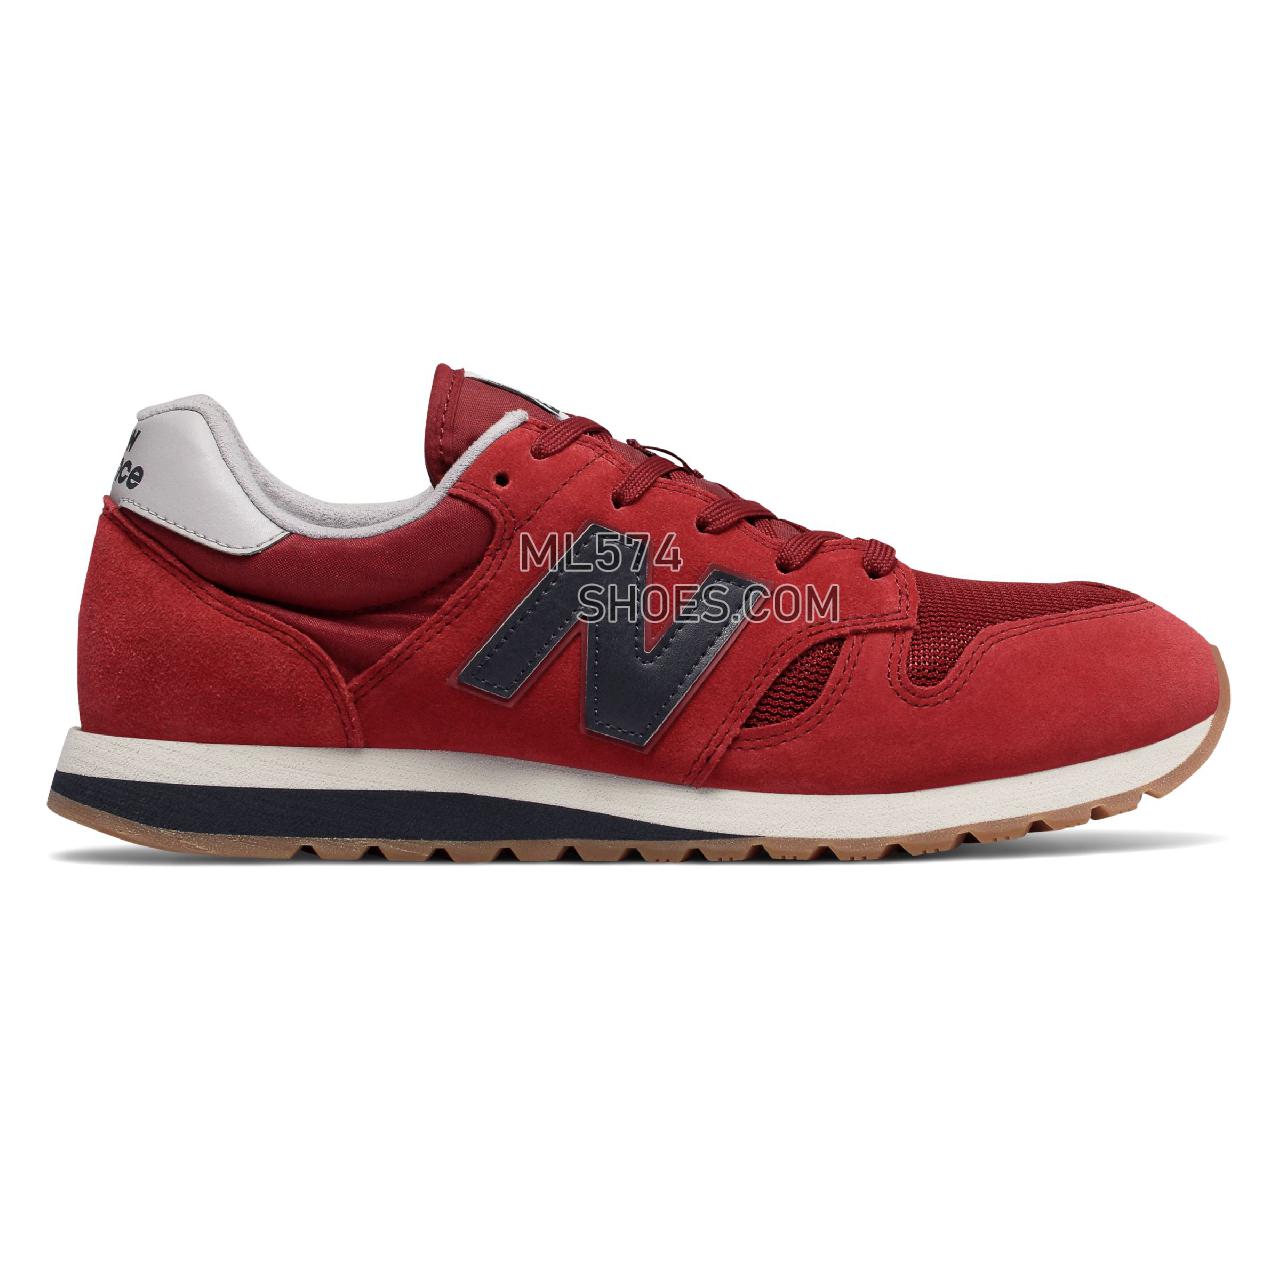 New Balance 520 - Unisex 520 - Classic Scarlet with Outerspace - U520EK